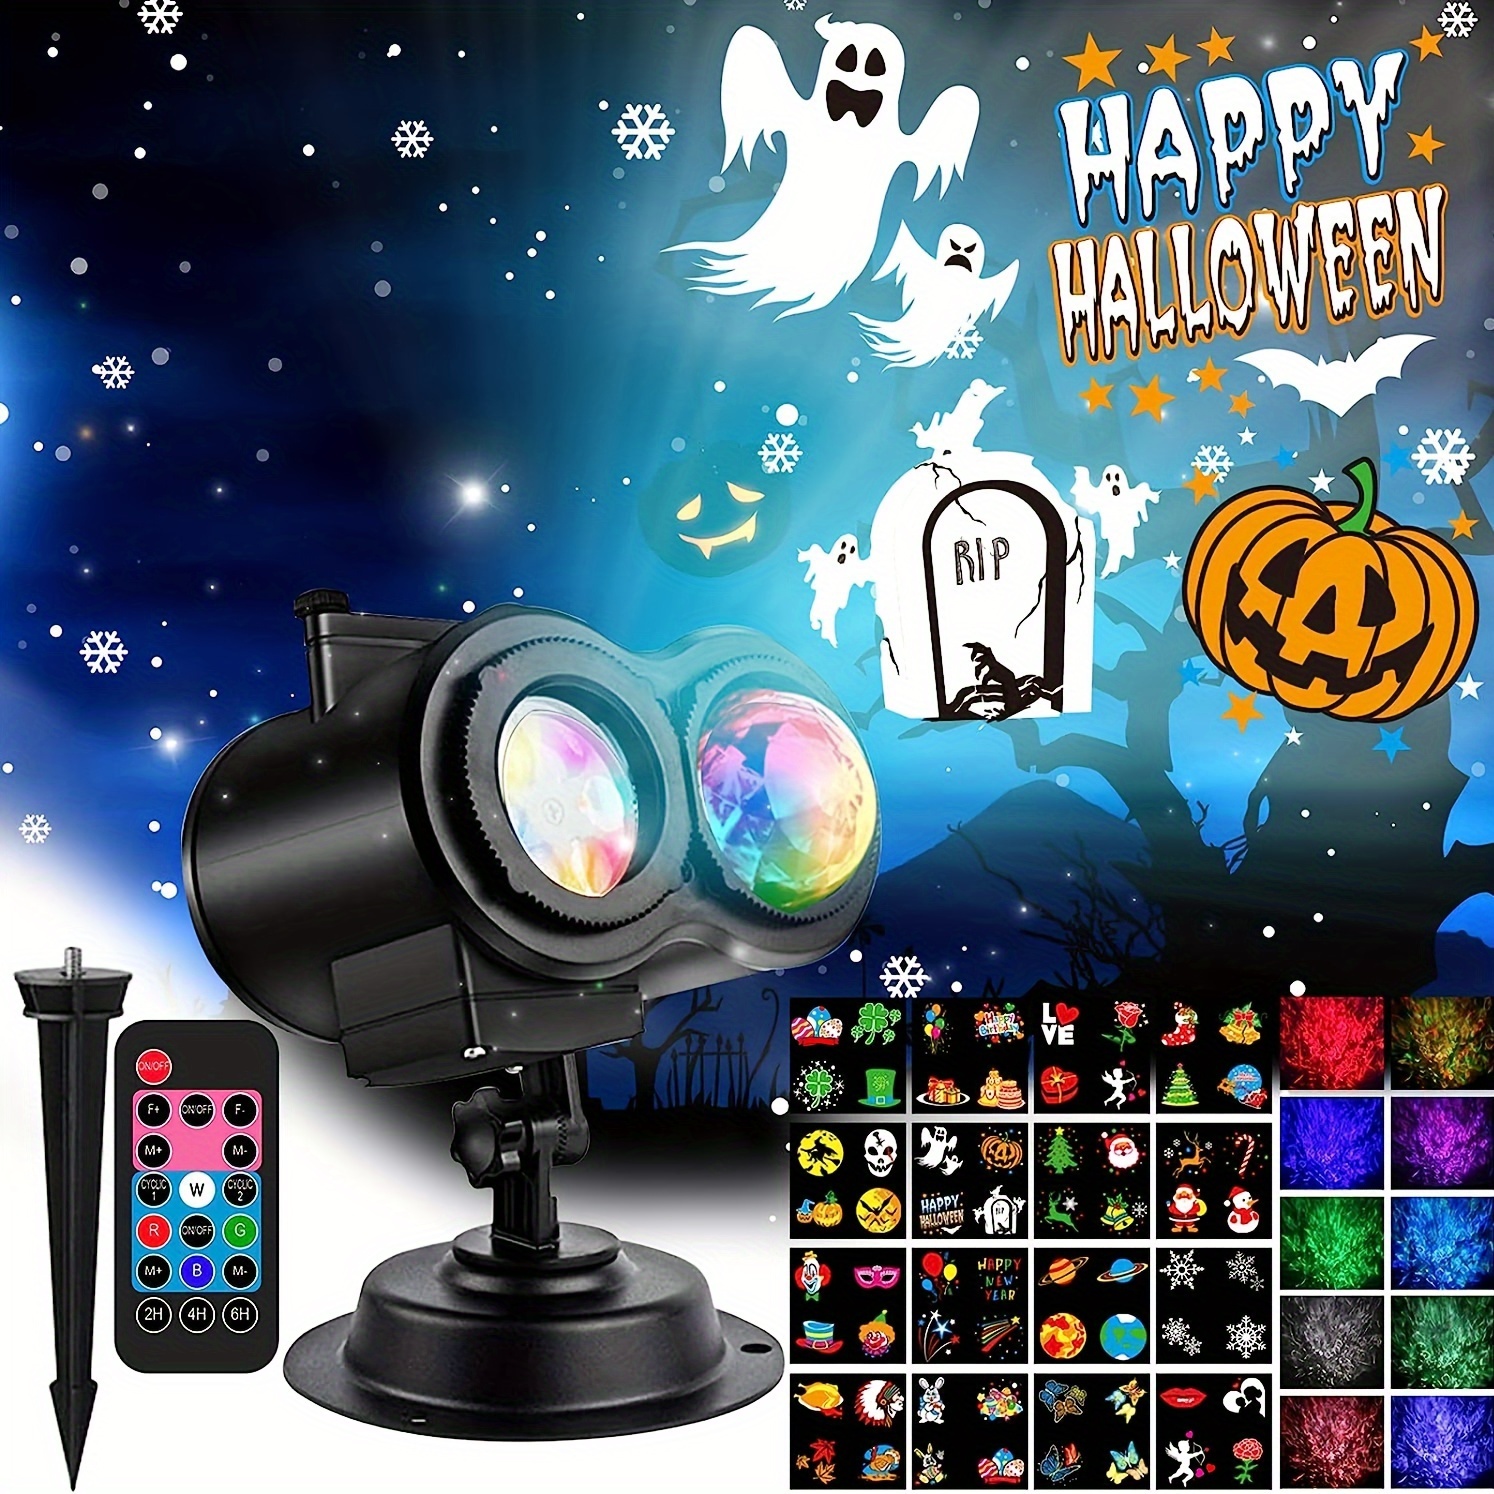 1 pack halloween christmas projector lights outdoor 16 different slides 2 in 1 led christmas snowflake projectors with remote control timer moving patterns ocean wave waterproof for xmas halloween holiday party details 3